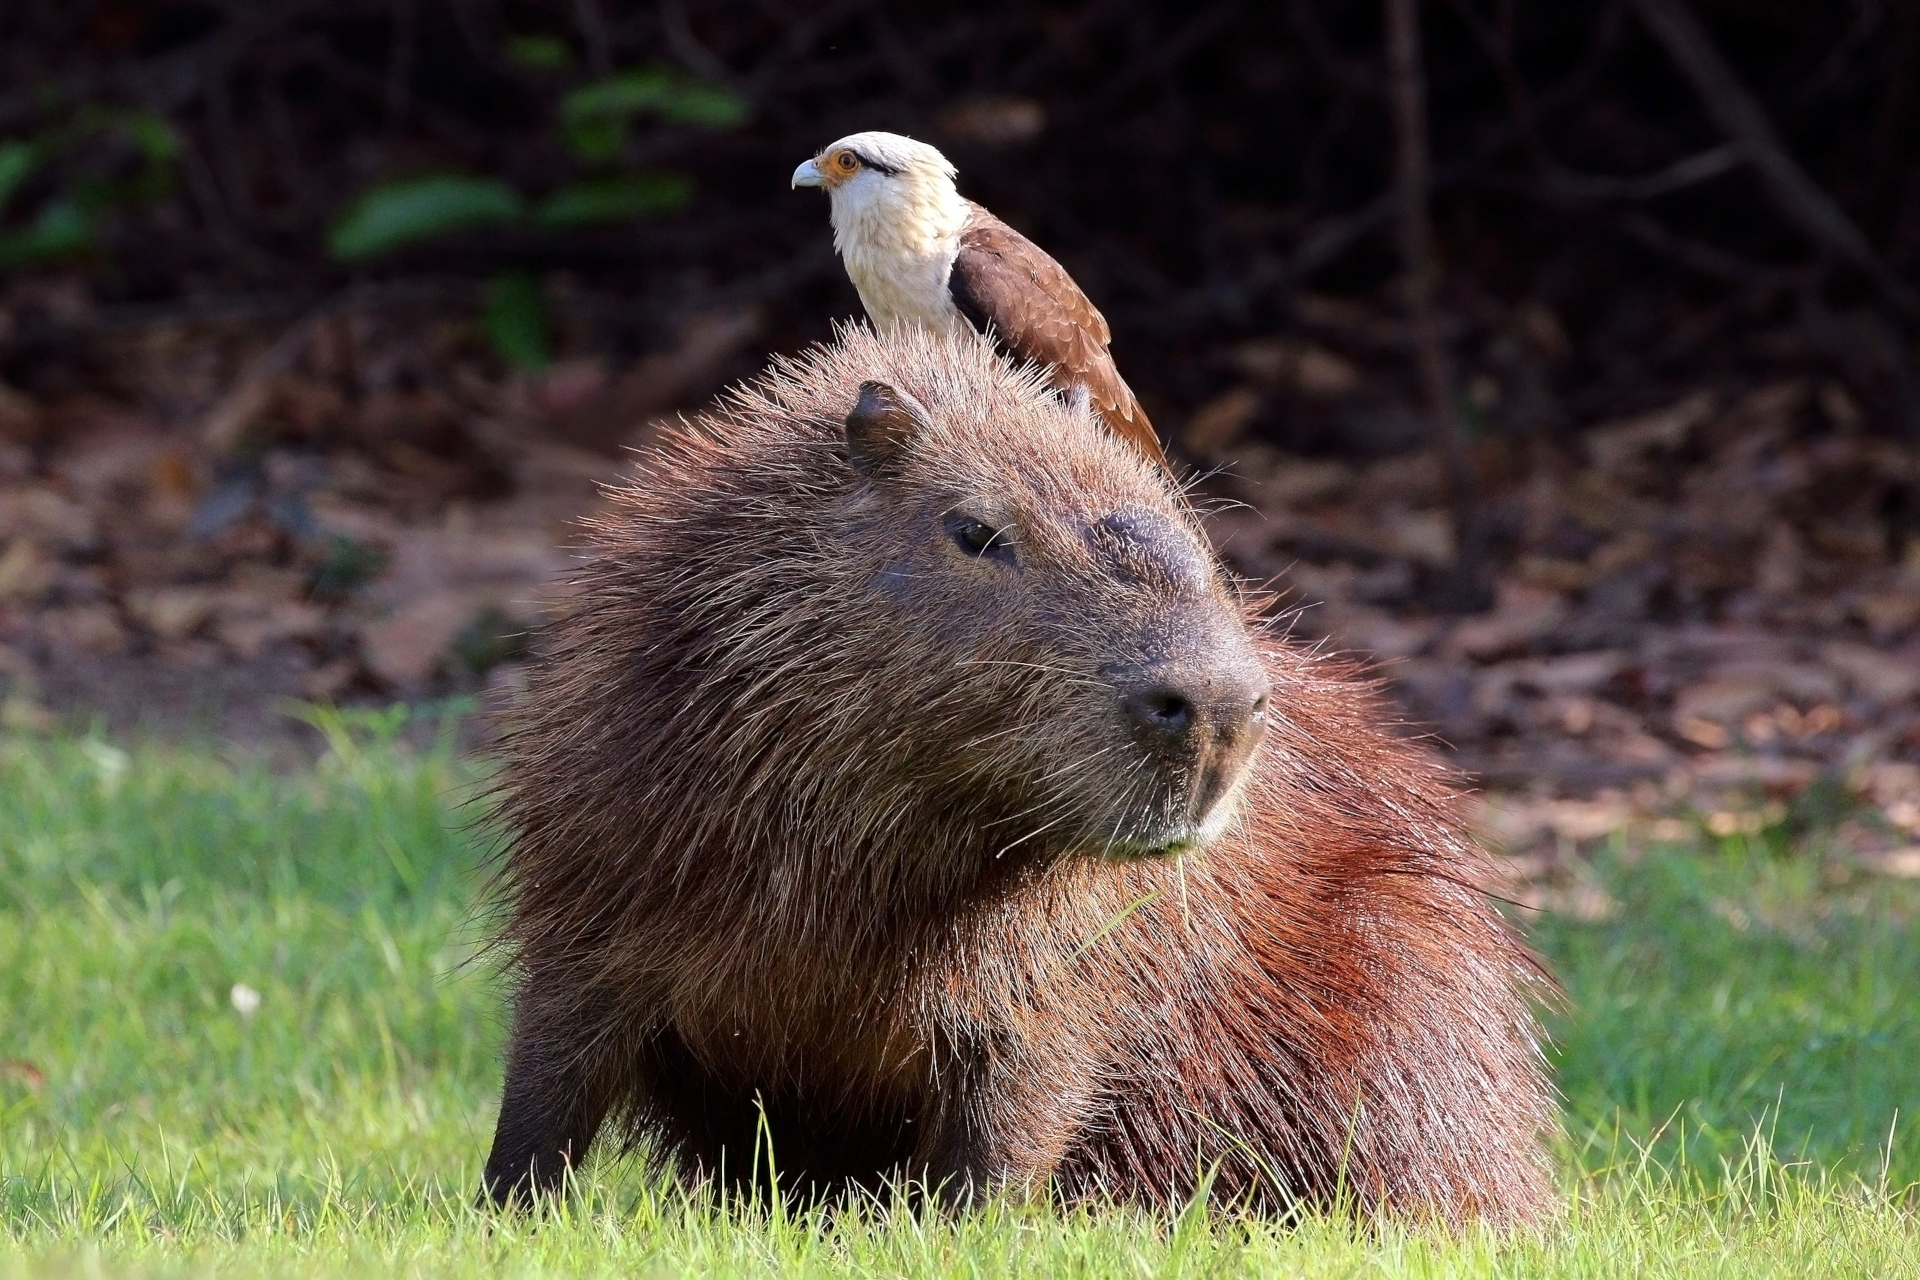 Capybara HD Wallpapers 1000 Free Capybara Wallpaper Images For All Devices